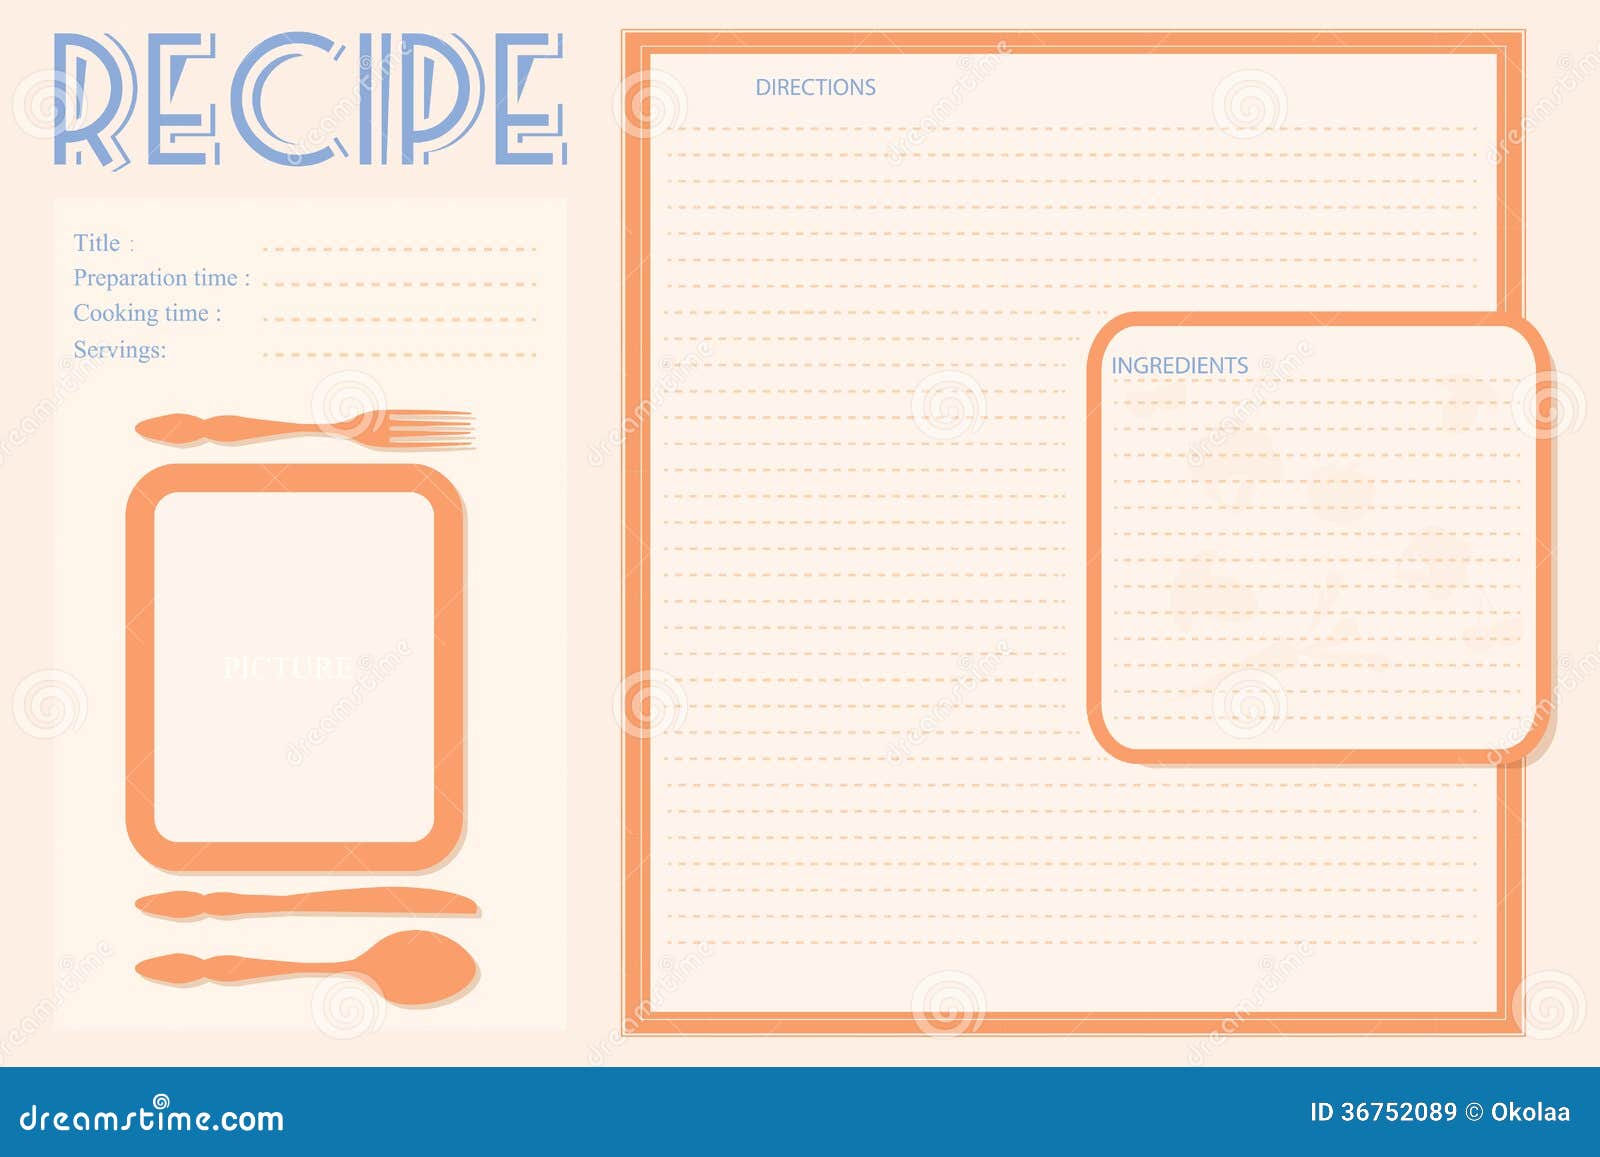 Recipe Layout Template from thumbs.dreamstime.com